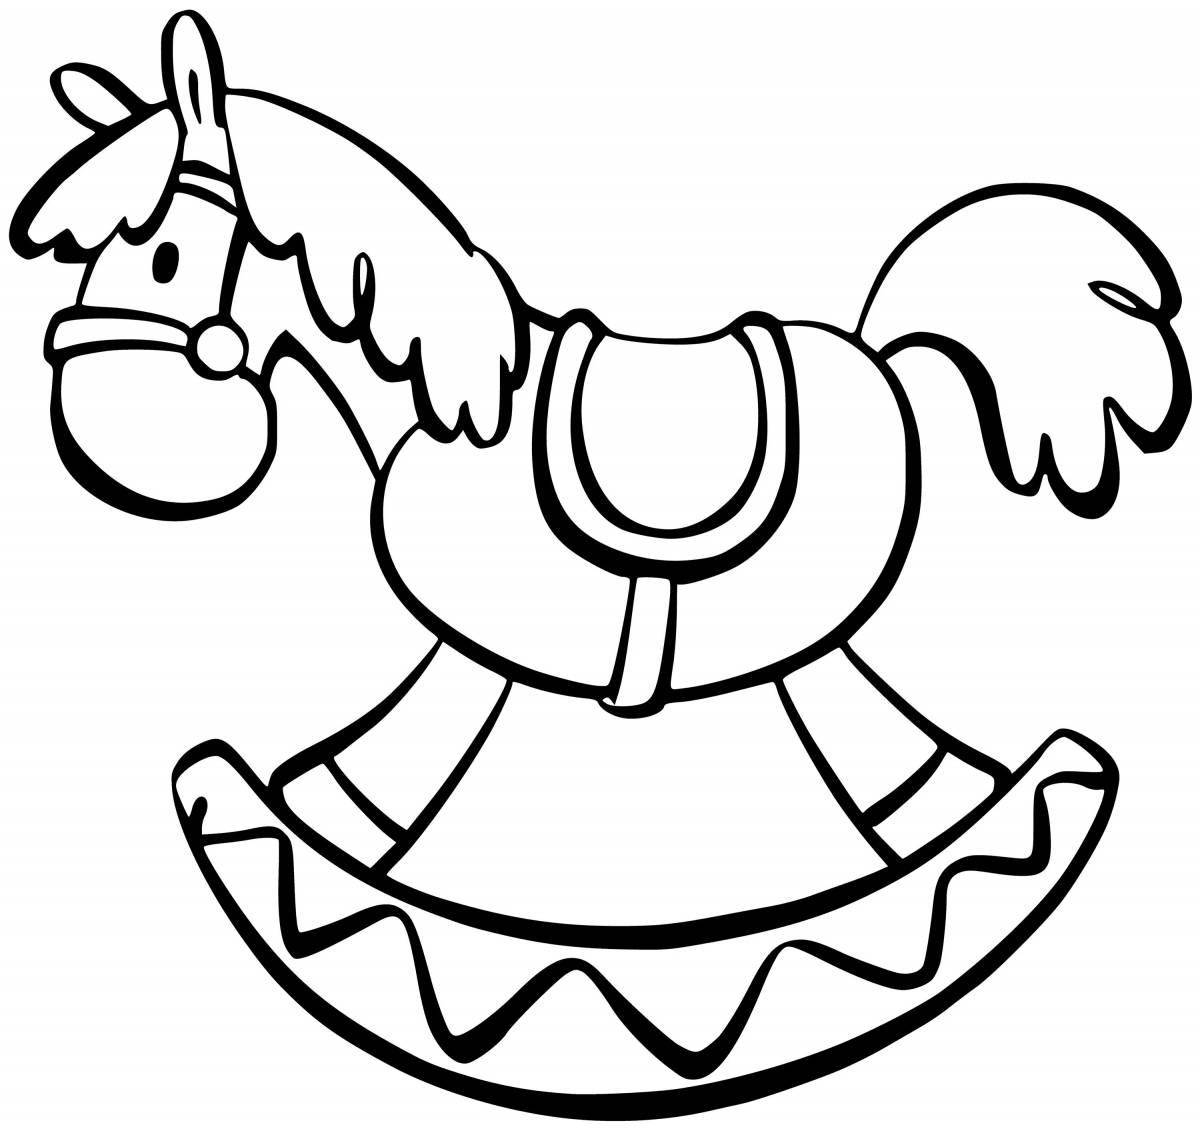 Live rocking horse coloring book for kids